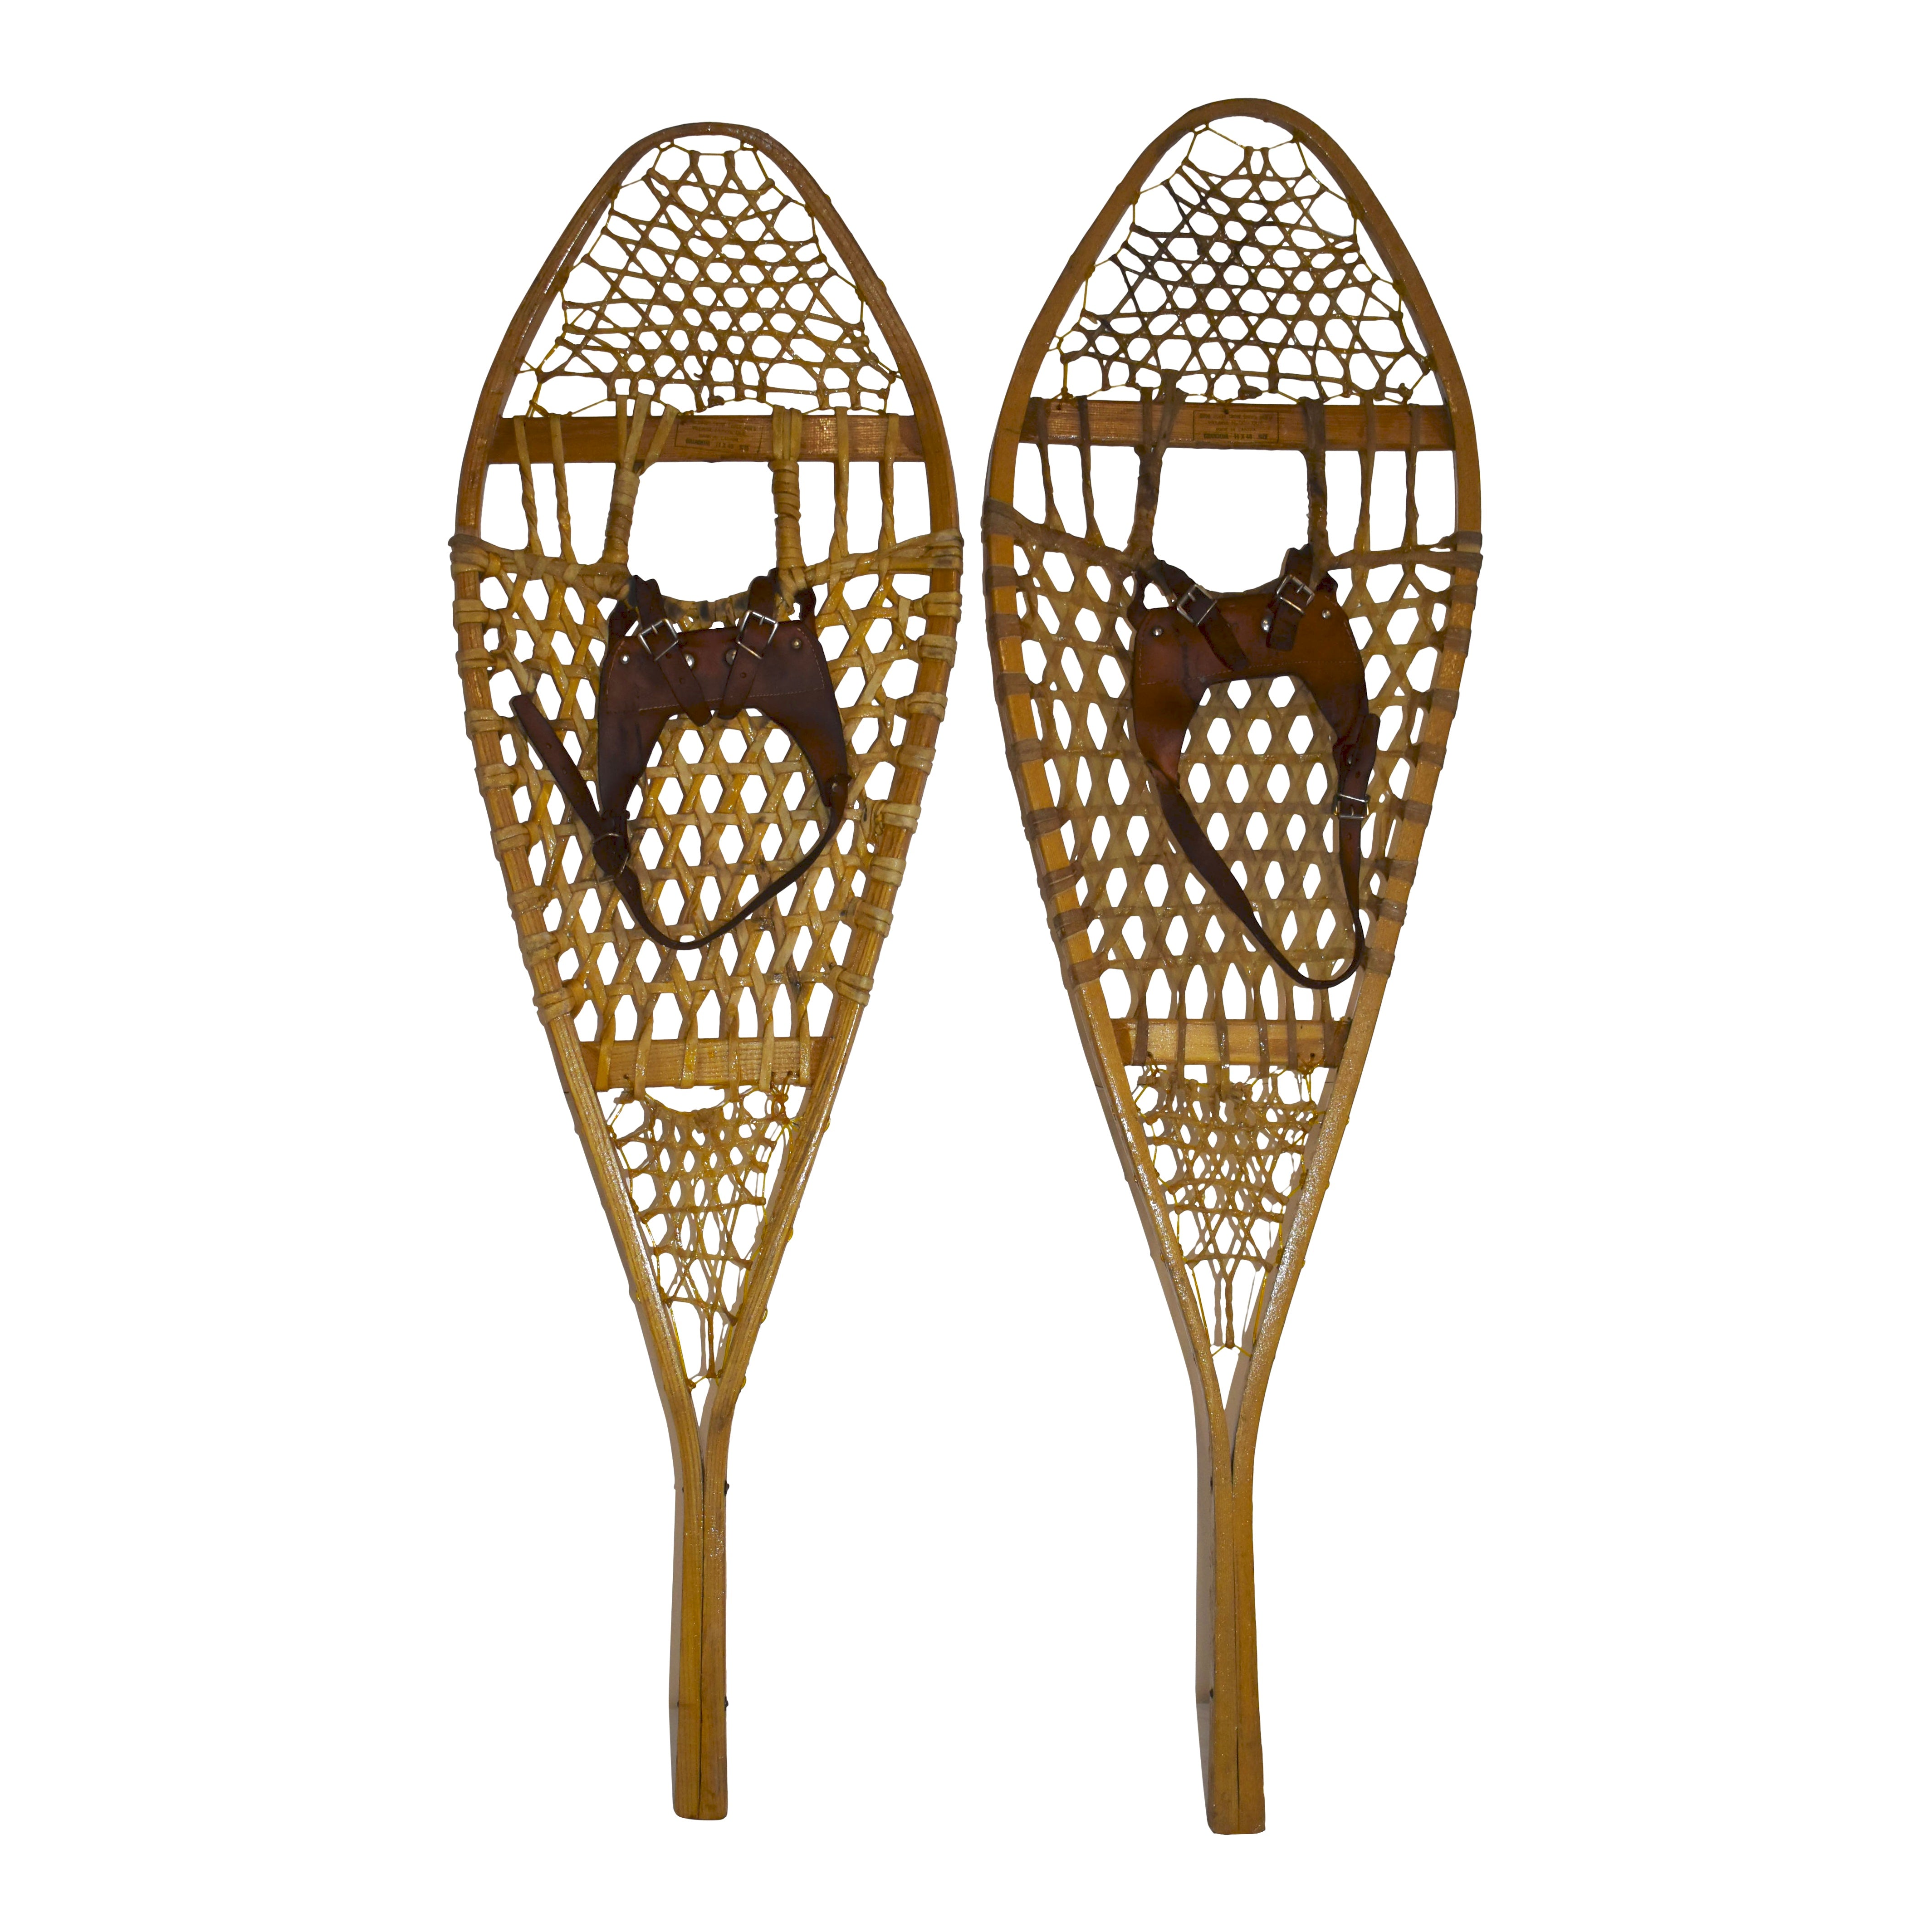 Canadian Huron Snowshoes by Gros-Louis